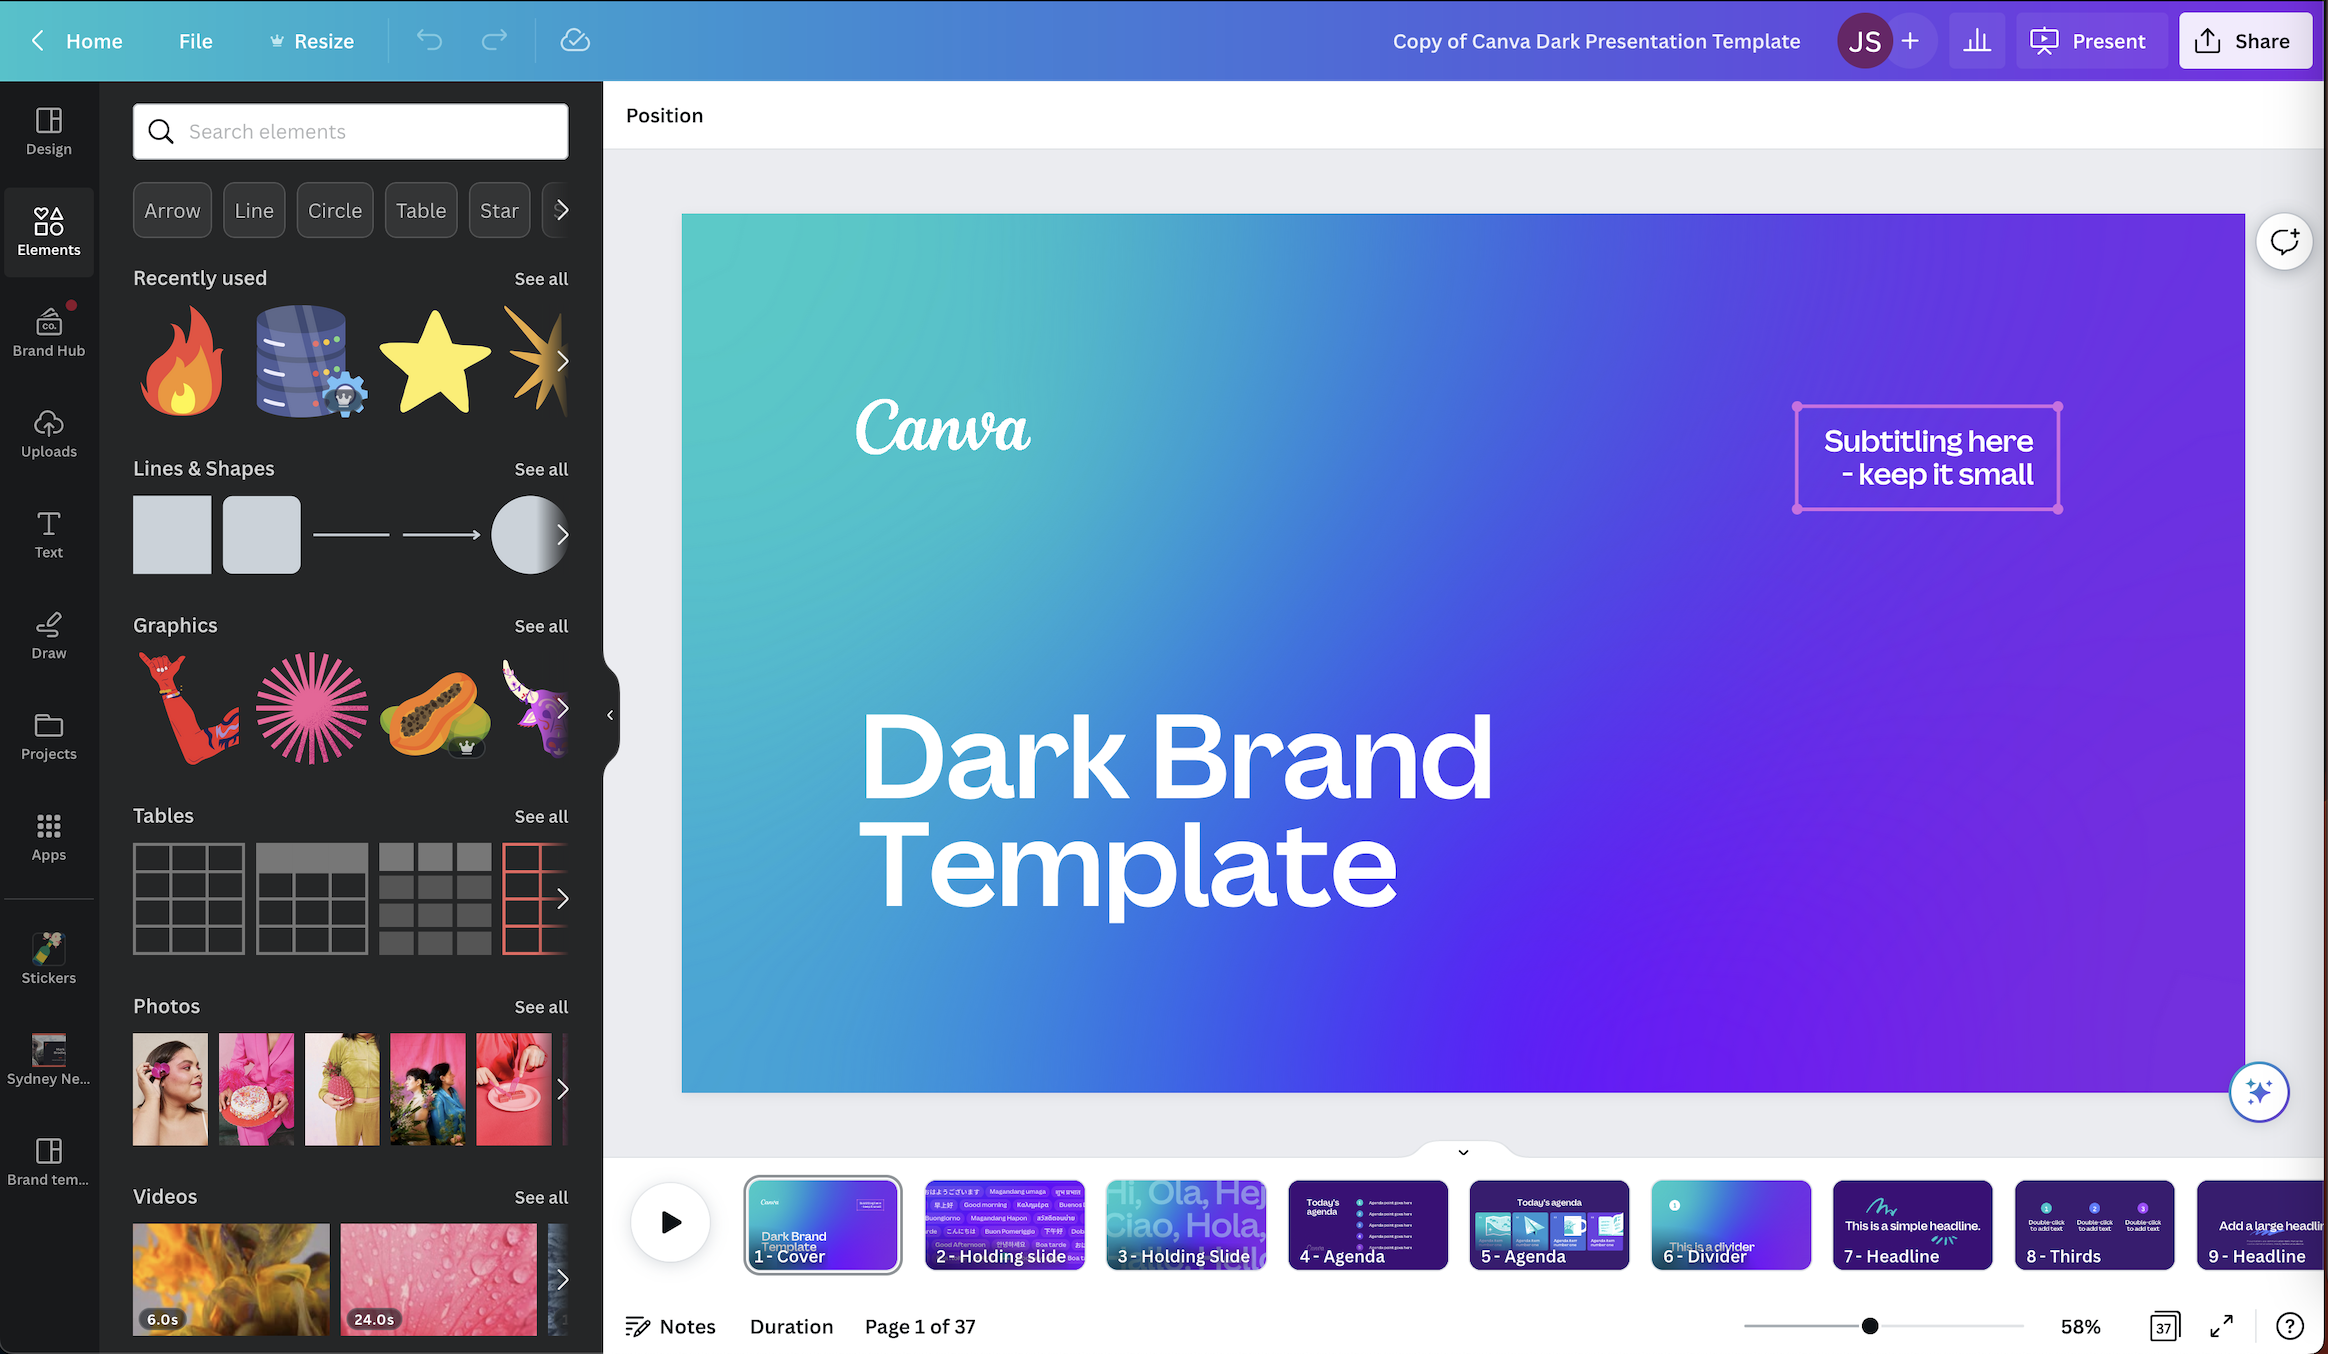 A brand-specific template for a Canva presentation